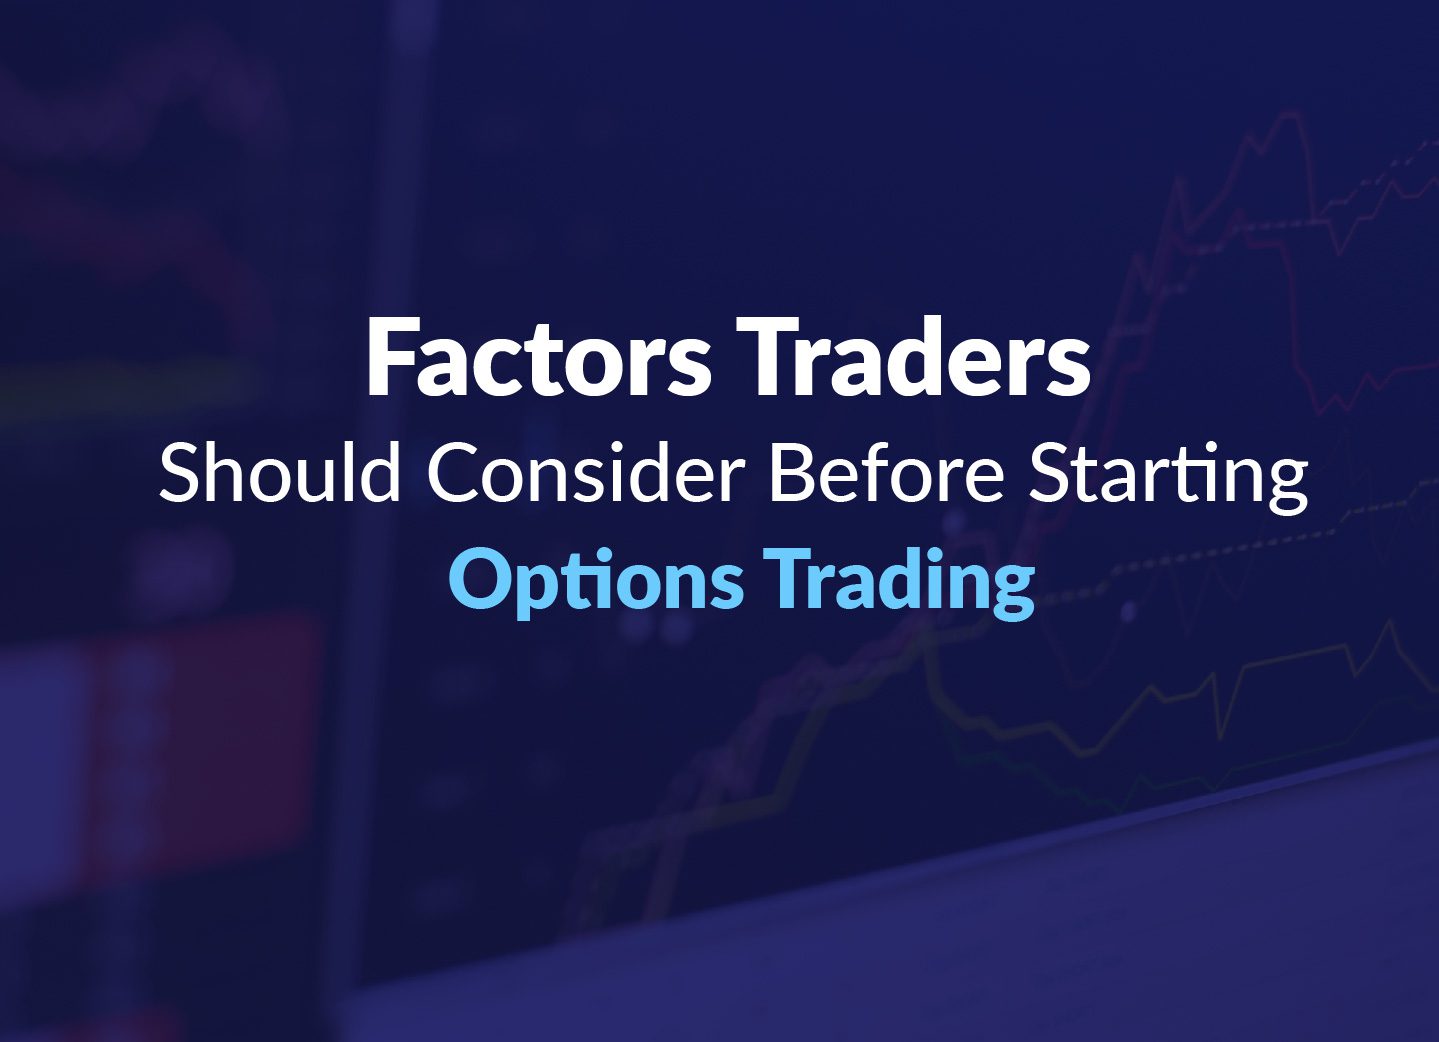 Factors Traders Should Consider Before Starting Options Trading